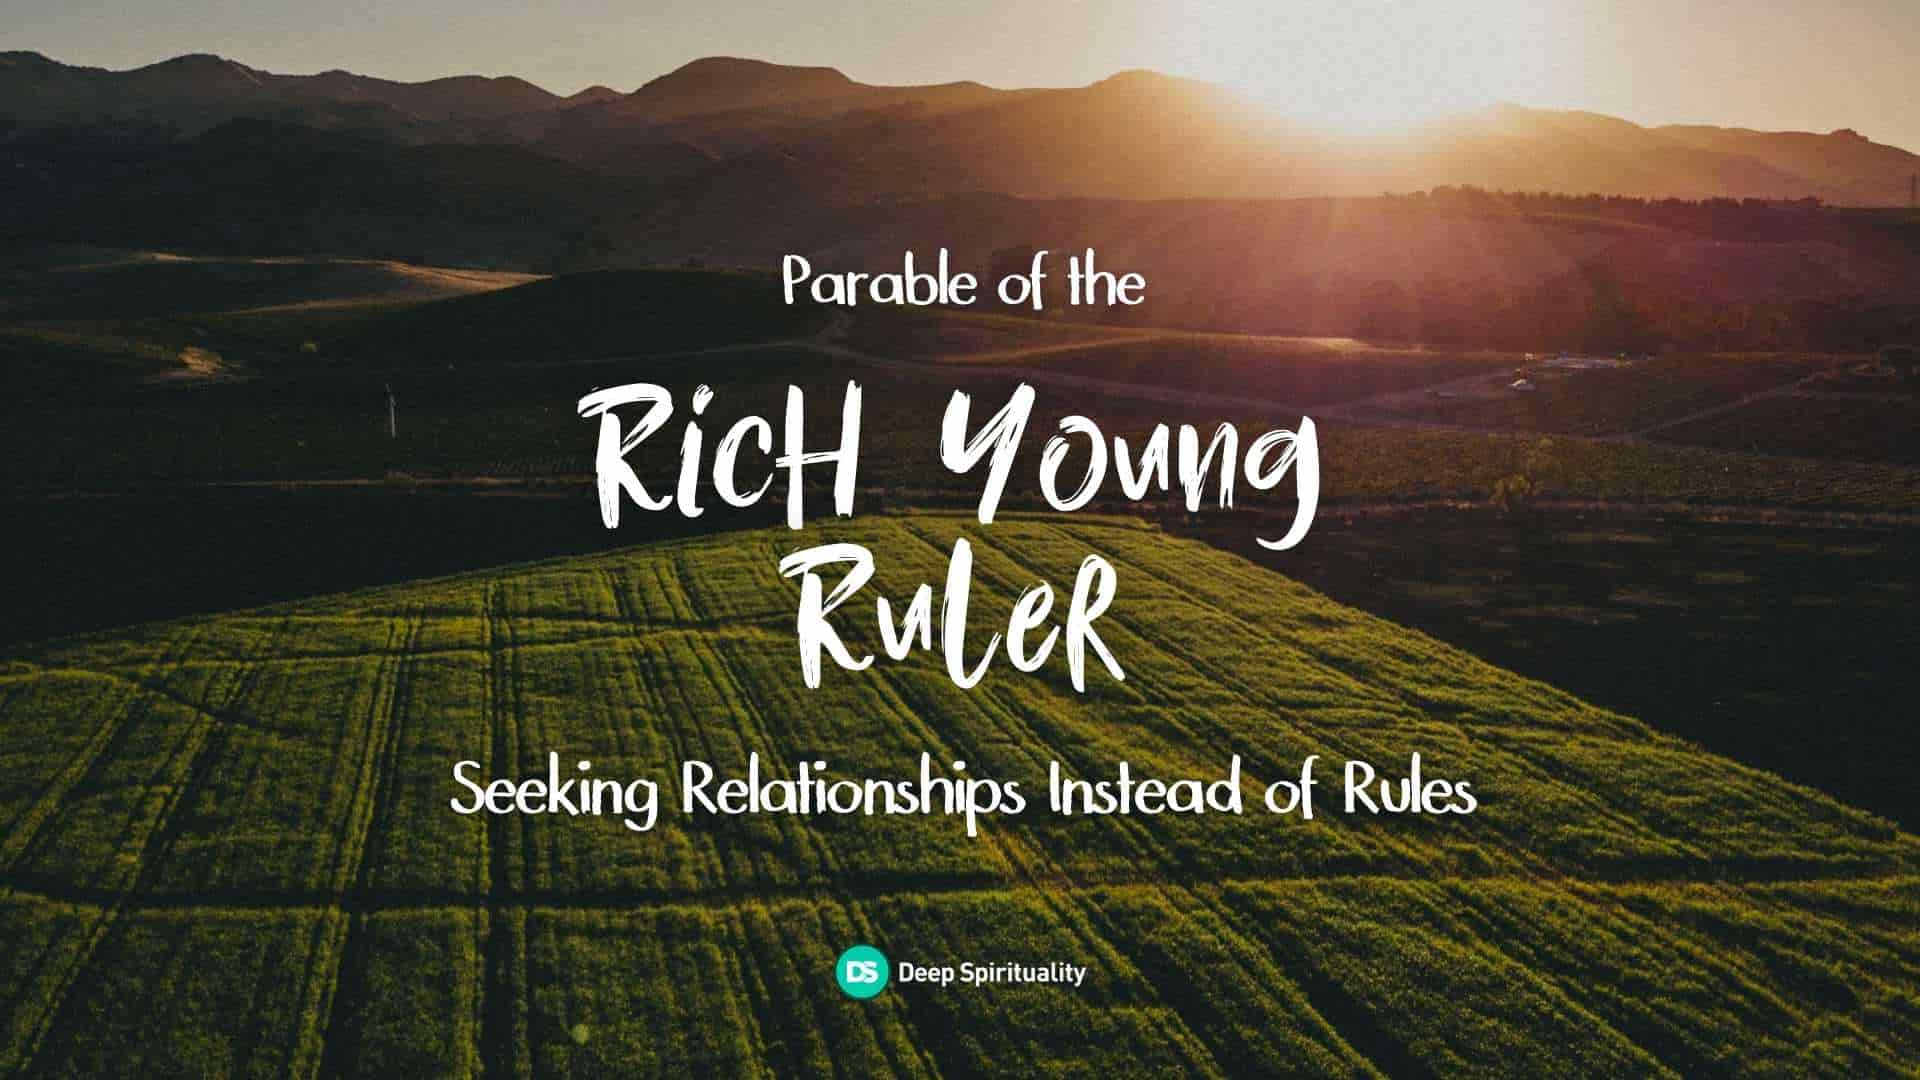 The Rich Young Ruler: How to Stop Seeing Rules and Start Seeing Relationship 4